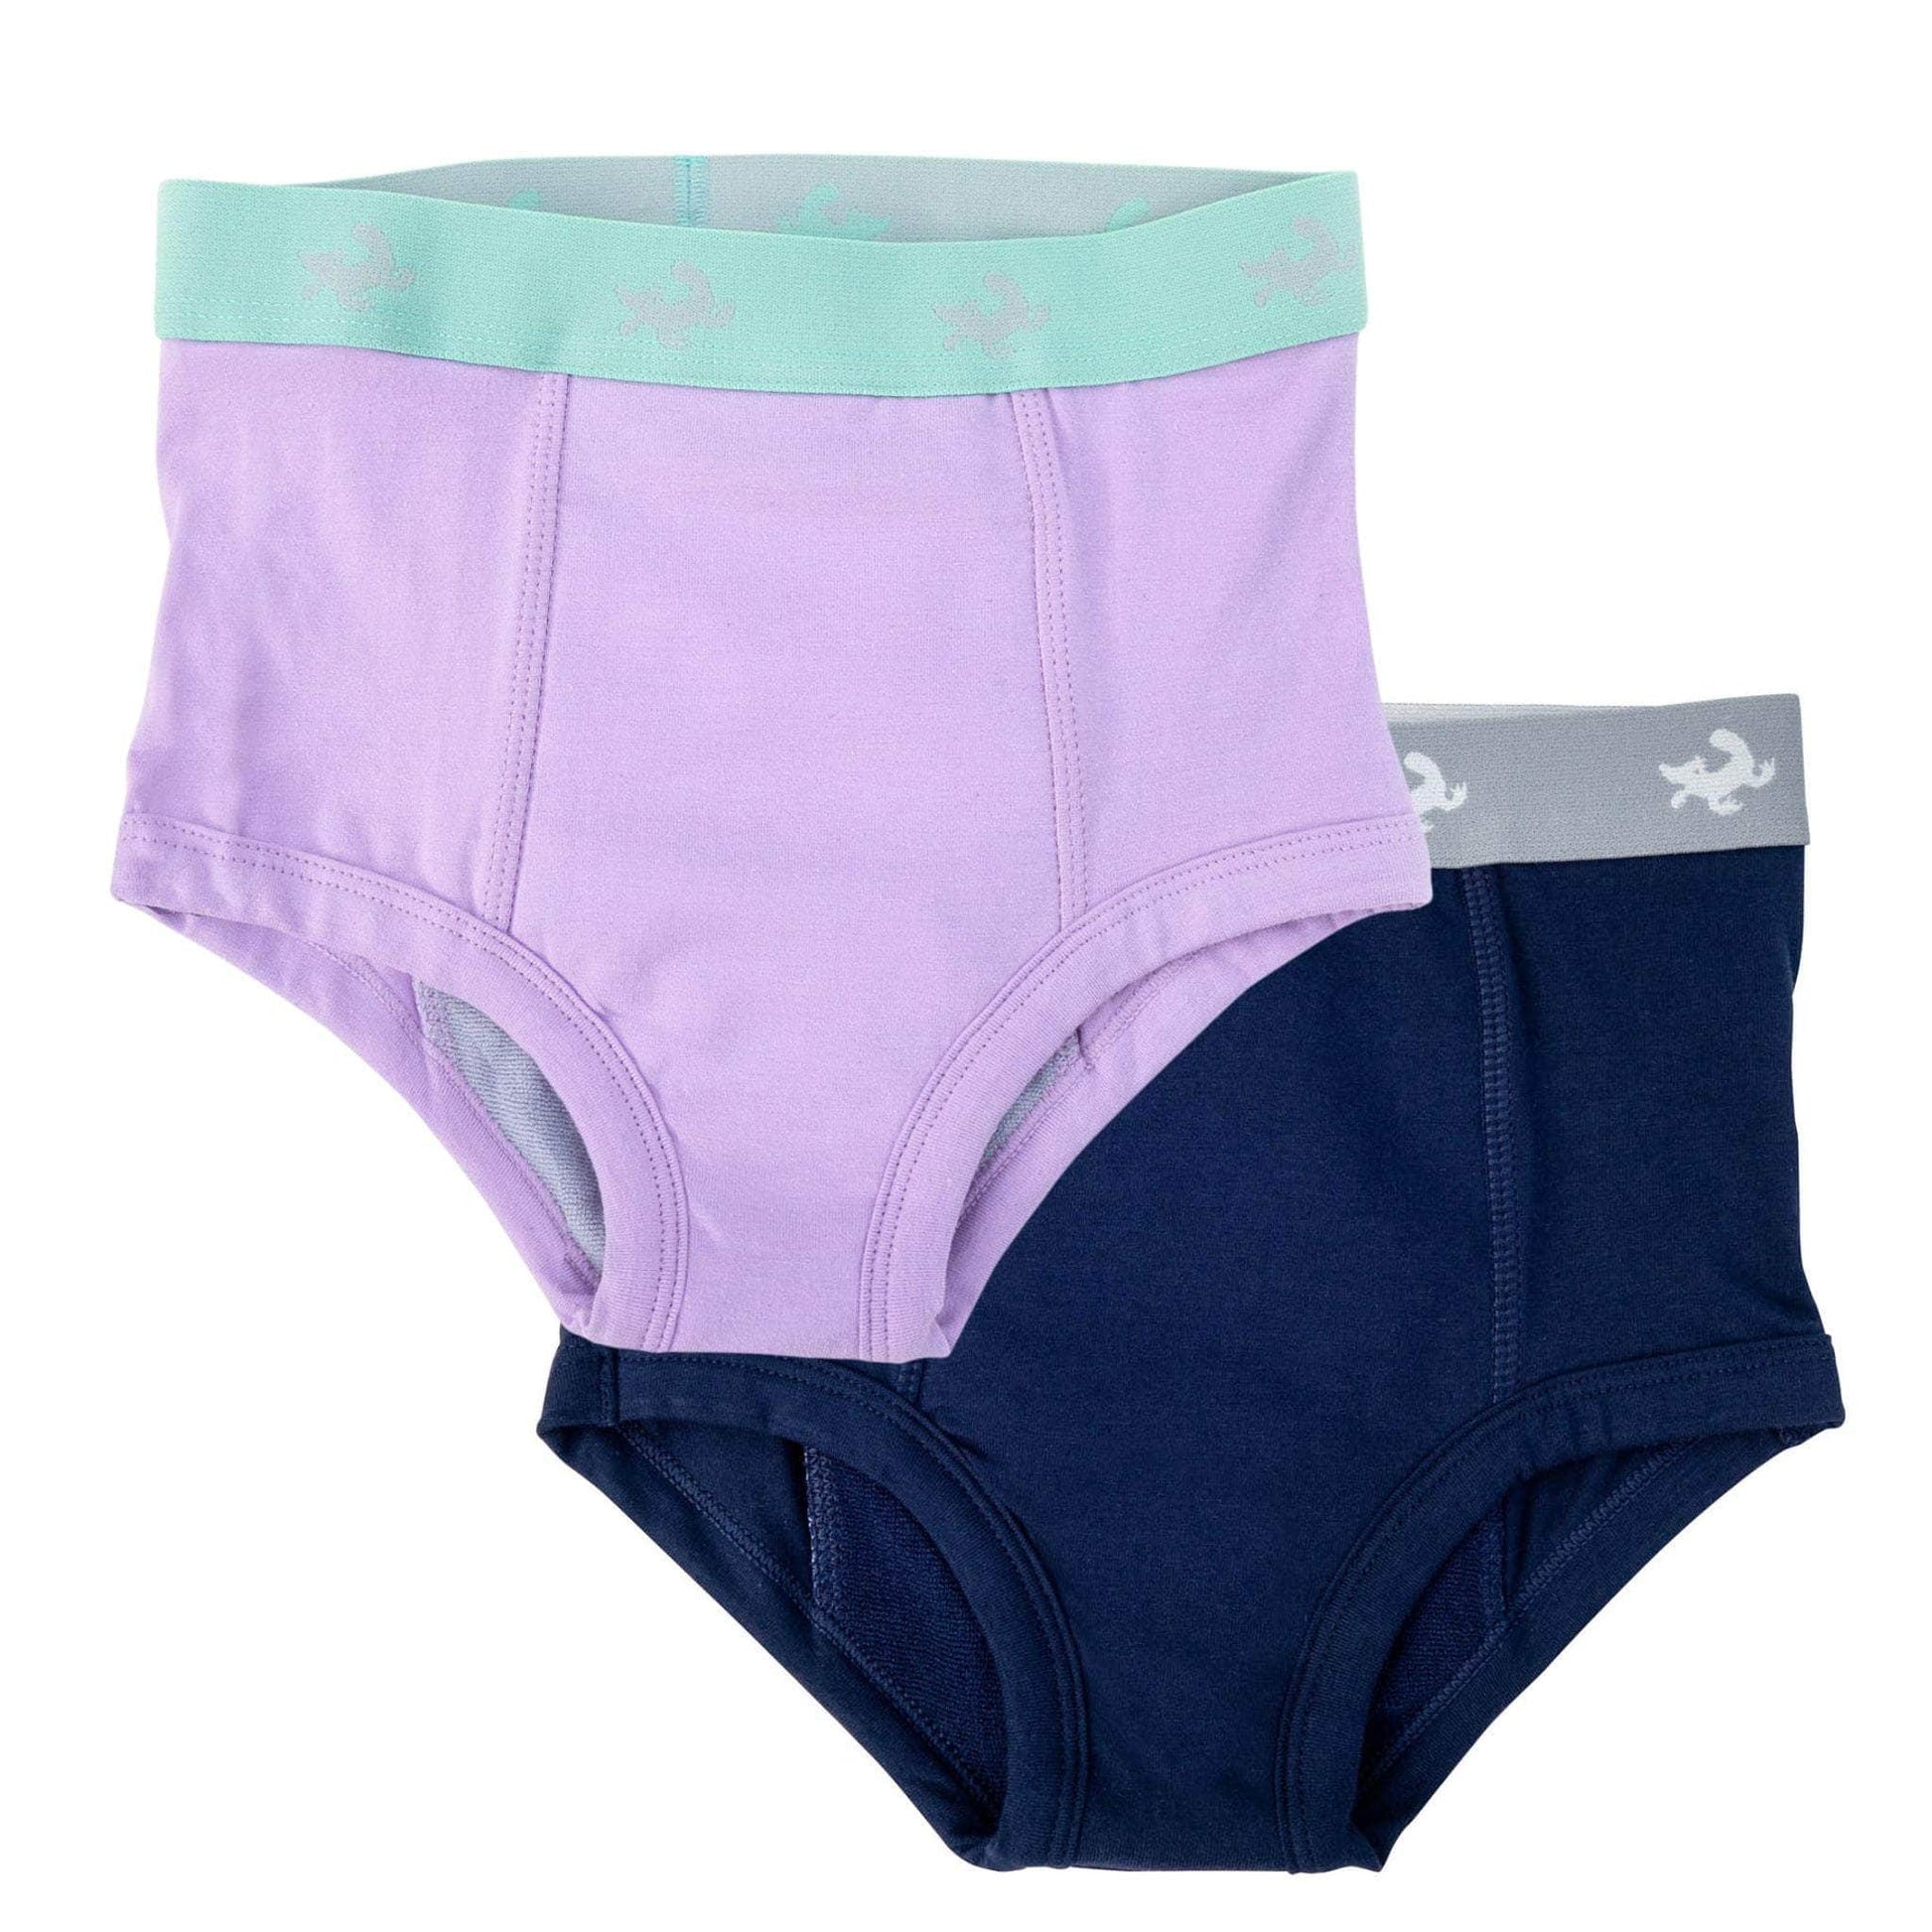 Conni Kids Incontinence Tackers Underwear - bundle